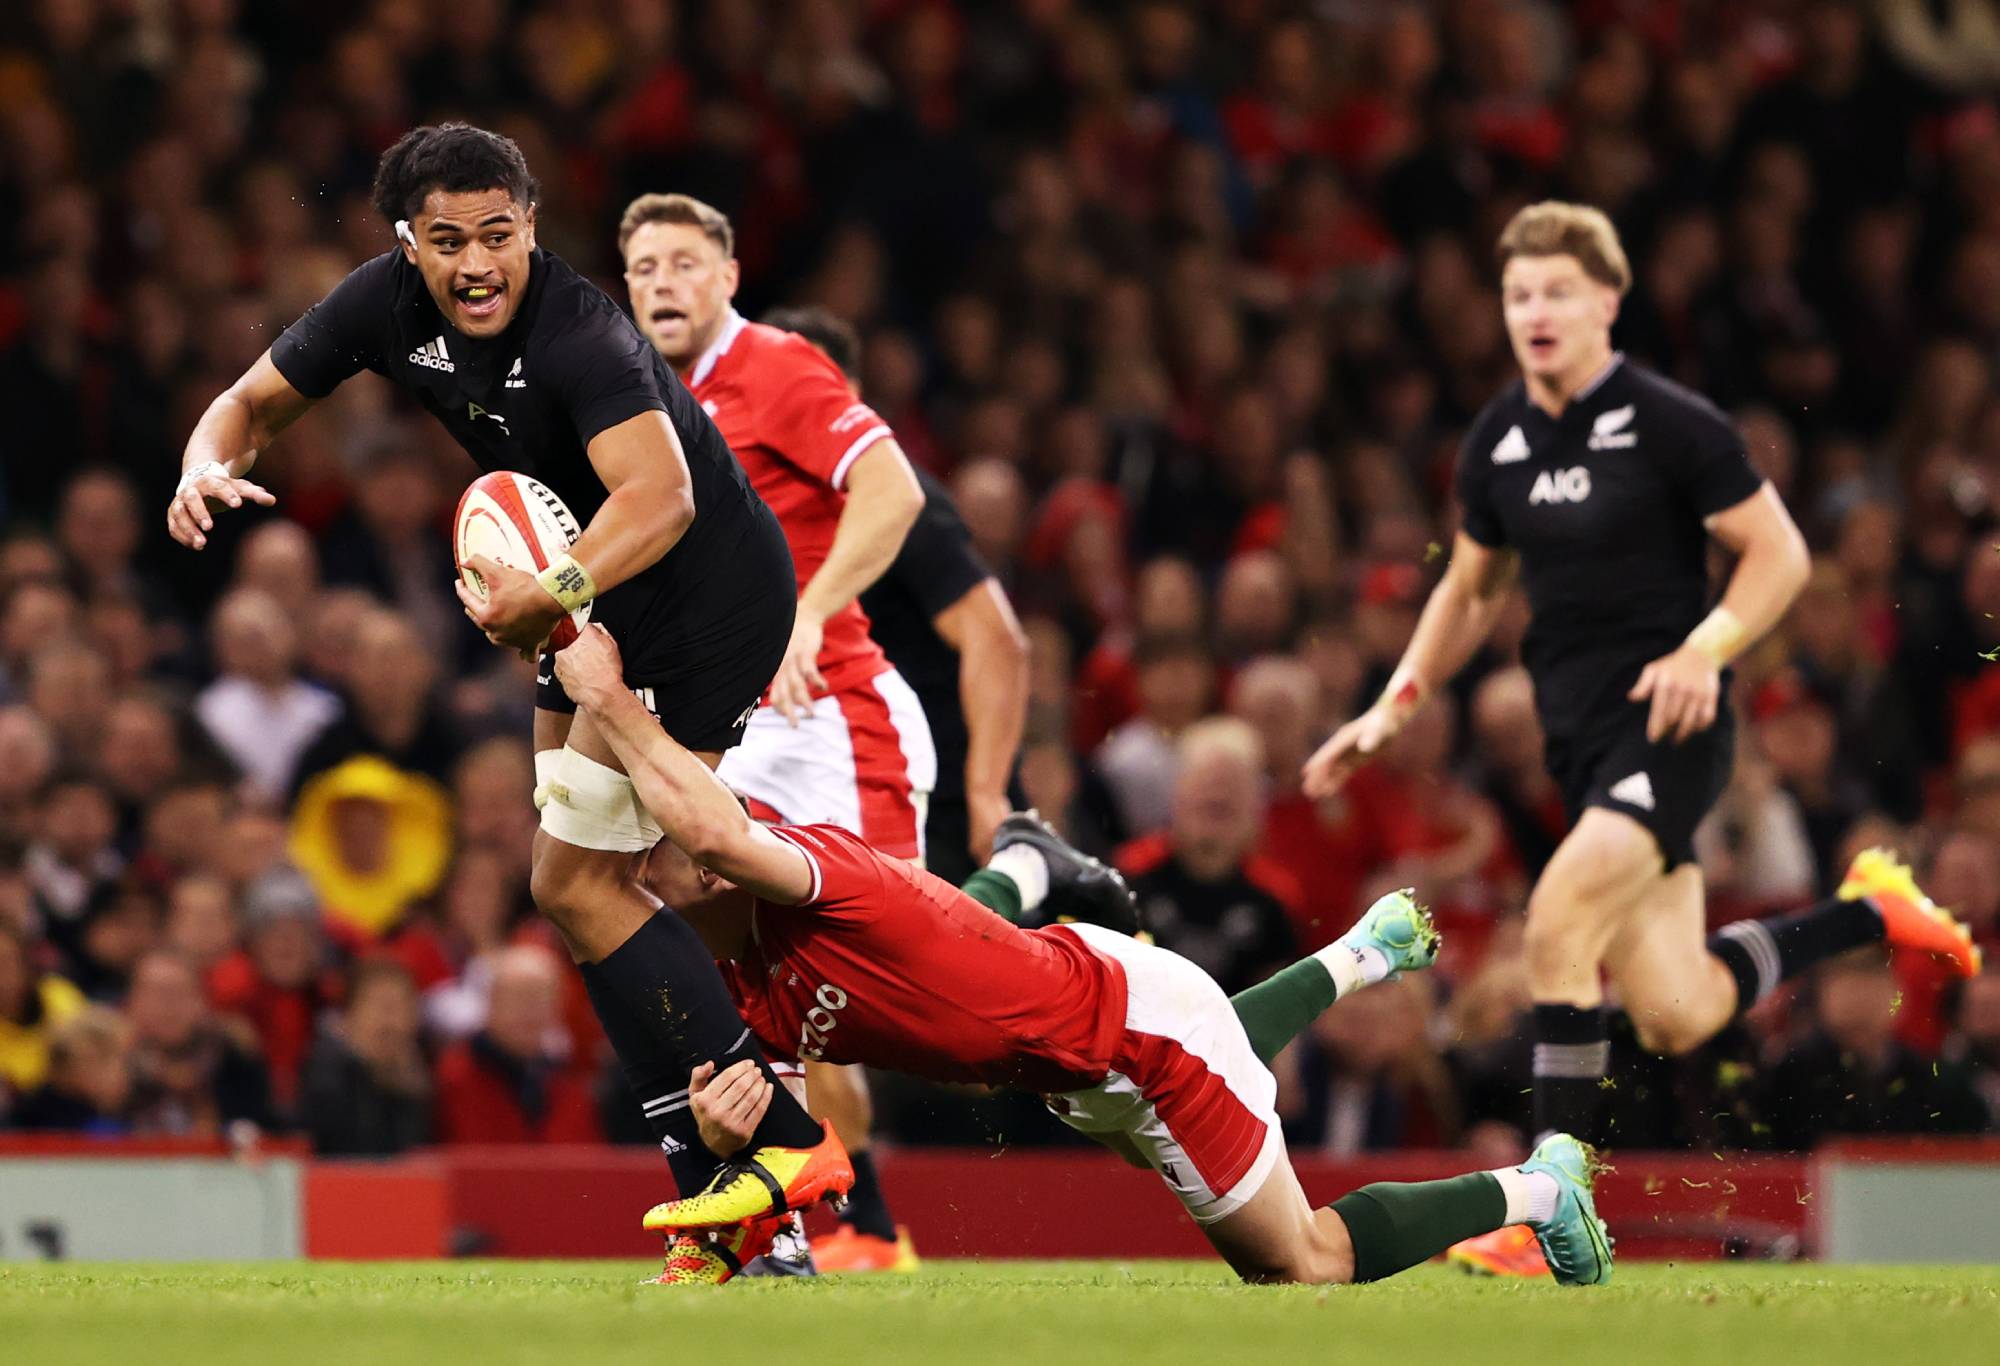 Tupou Vaa'i of New Zealand is tackled by Josh Adams of Wales during the Autumn International match between Wales and New Zealand at Principality Stadium on October 30, 2021 in Cardiff, Wales. (Photo by Warren Little/Getty Images)